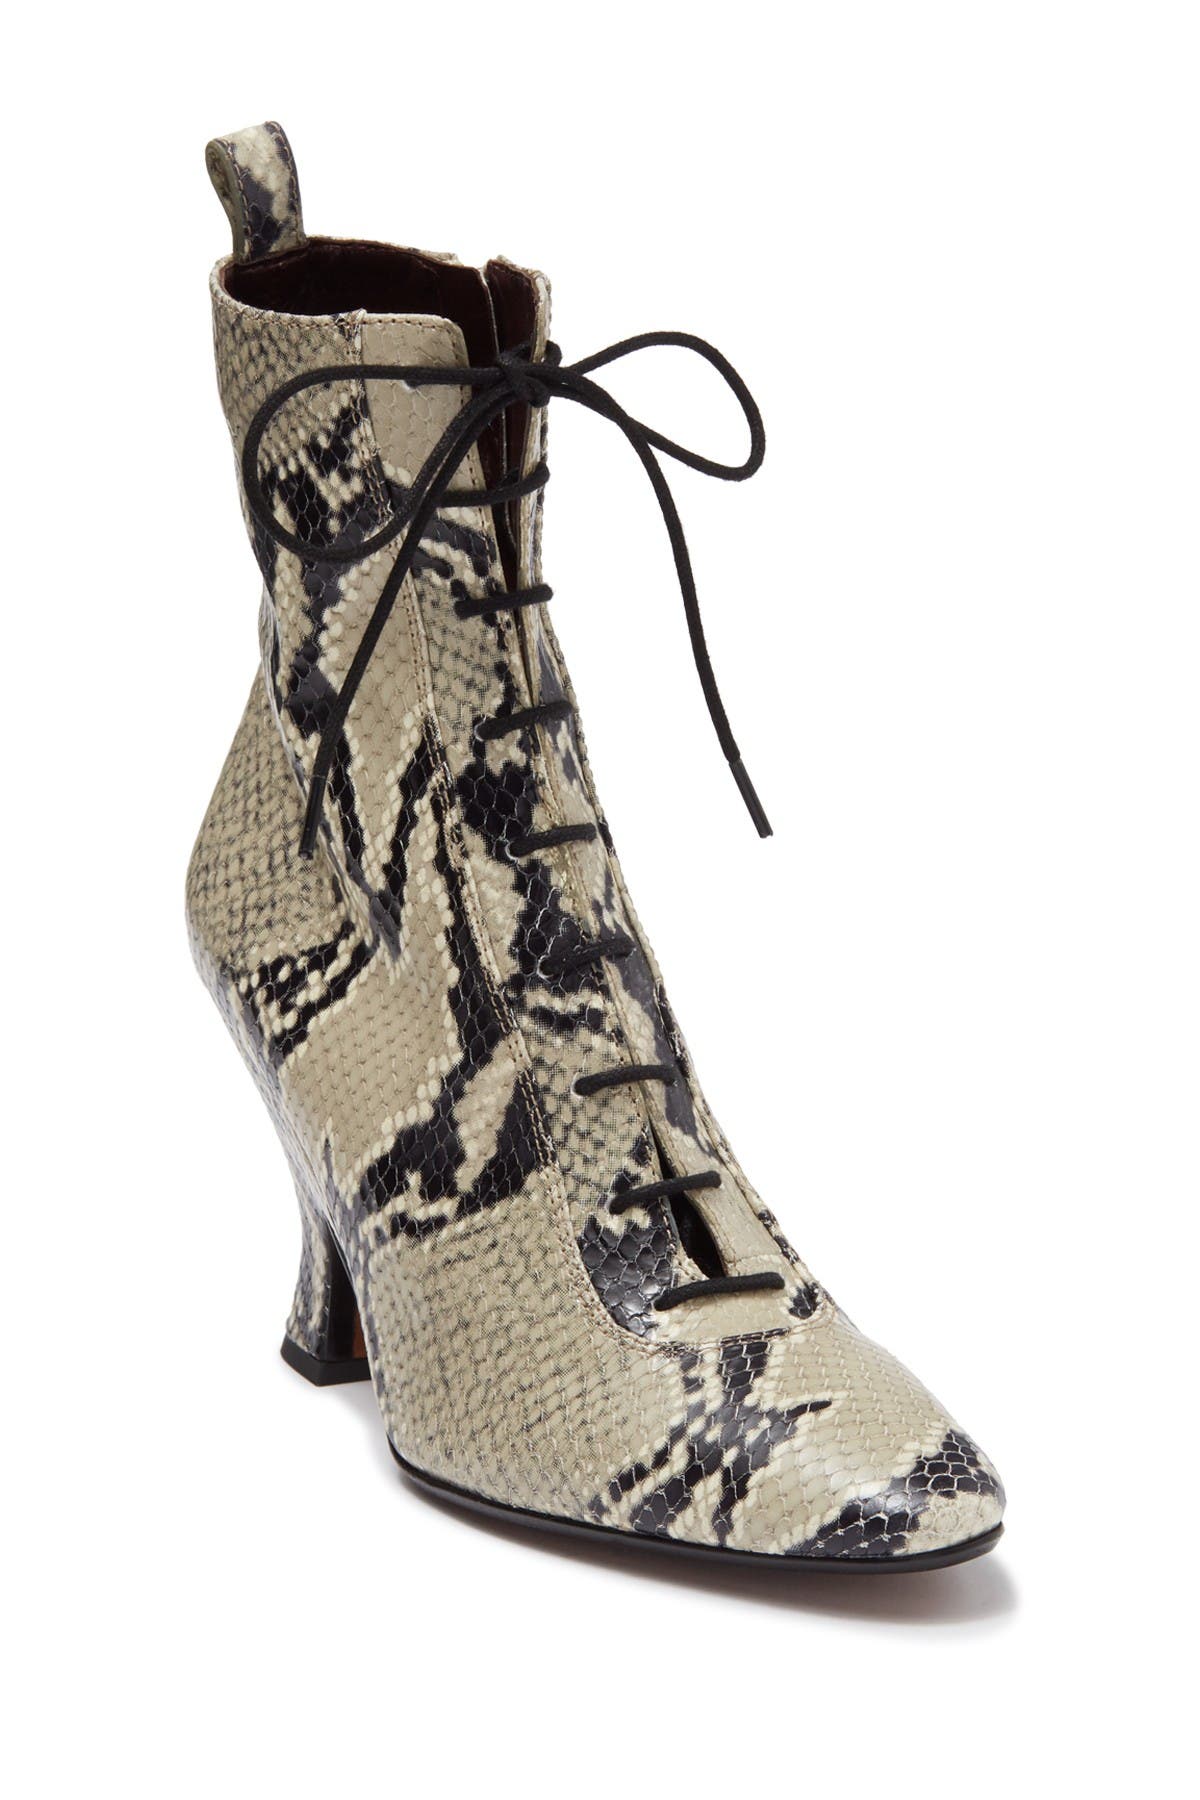 marc jacobs snake boots